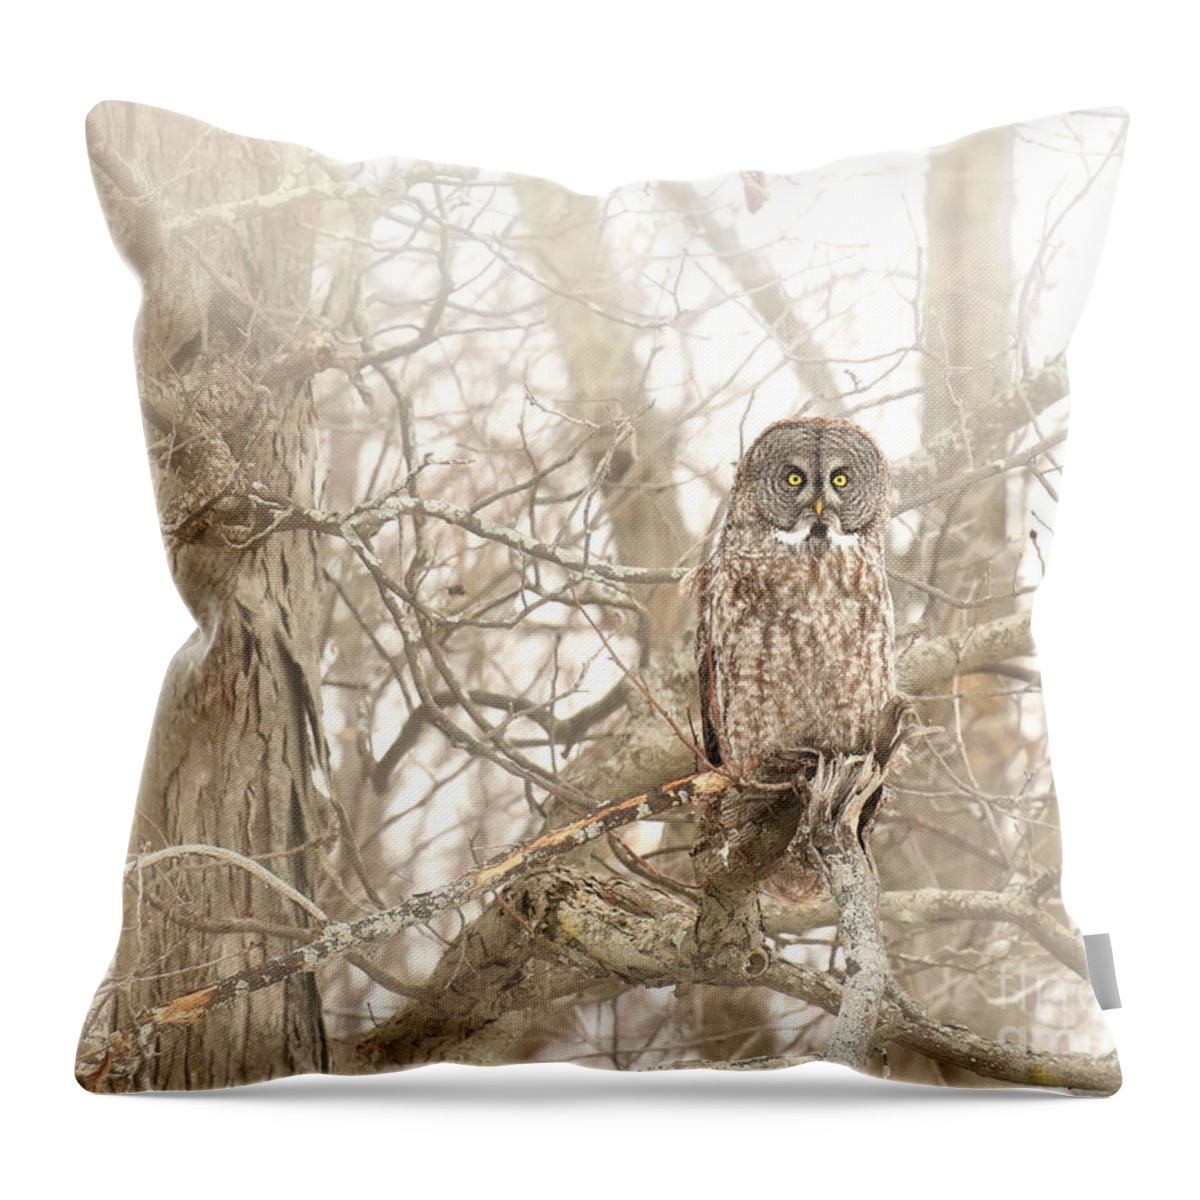 Oneness Throw Pillow featuring the photograph She can see everything through the fog by Heather King